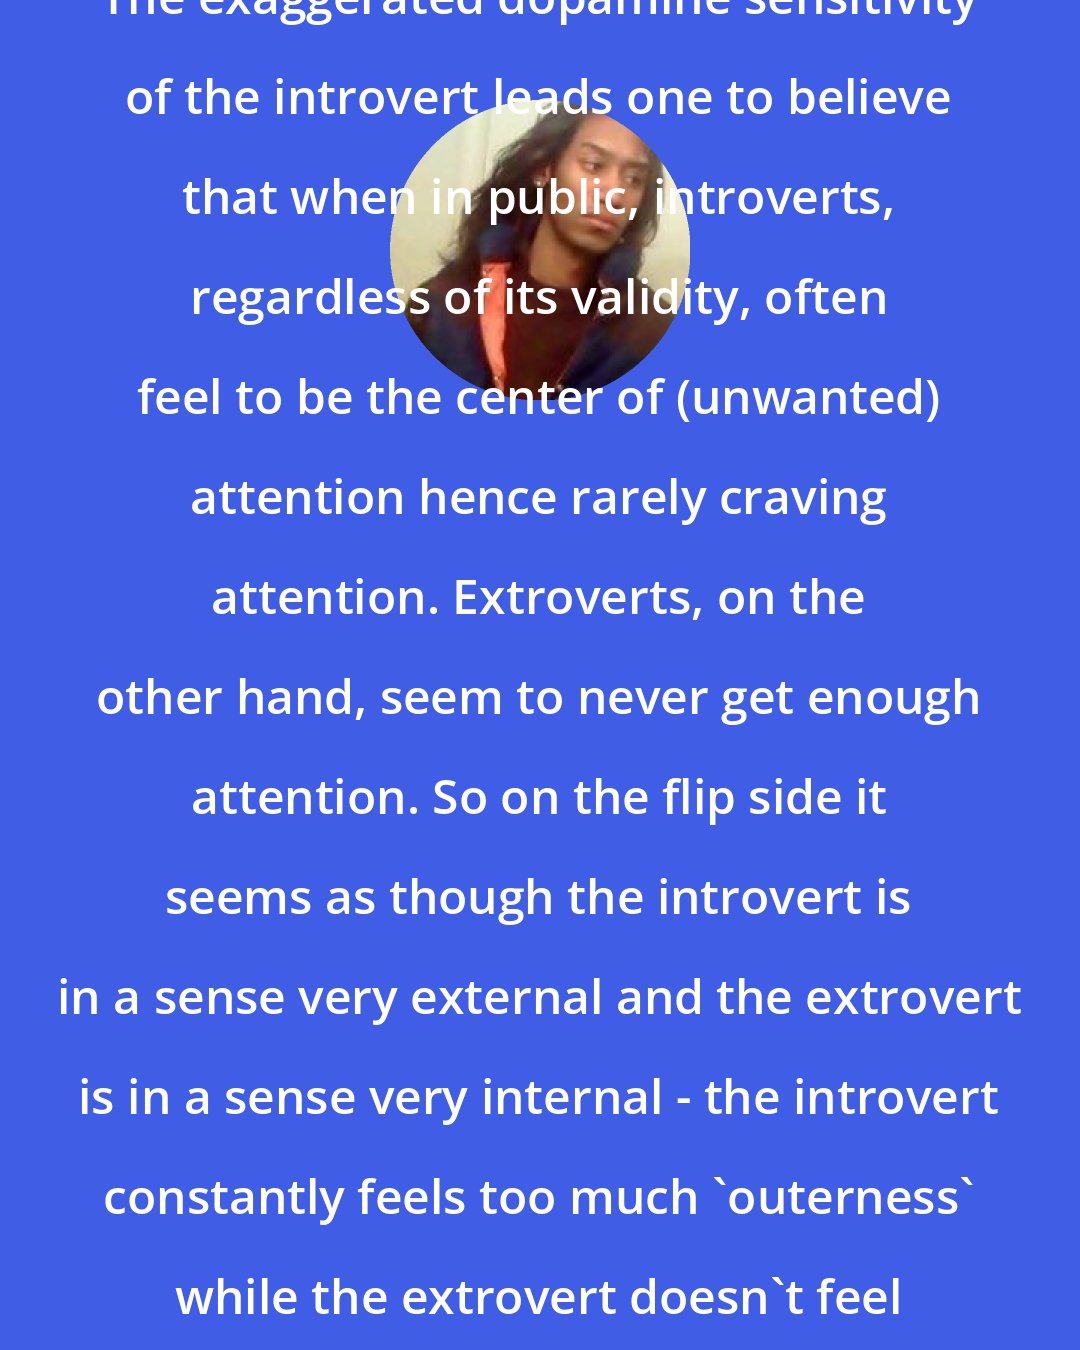 Criss Jami: The exaggerated dopamine sensitivity of the introvert leads one to believe that when in public, introverts, regardless of its validity, often feel to be the center of (unwanted) attention hence rarely craving attention. Extroverts, on the other hand, seem to never get enough attention. So on the flip side it seems as though the introvert is in a sense very external and the extrovert is in a sense very internal - the introvert constantly feels too much 'outerness' while the extrovert doesn't feel enough 'outerness'.